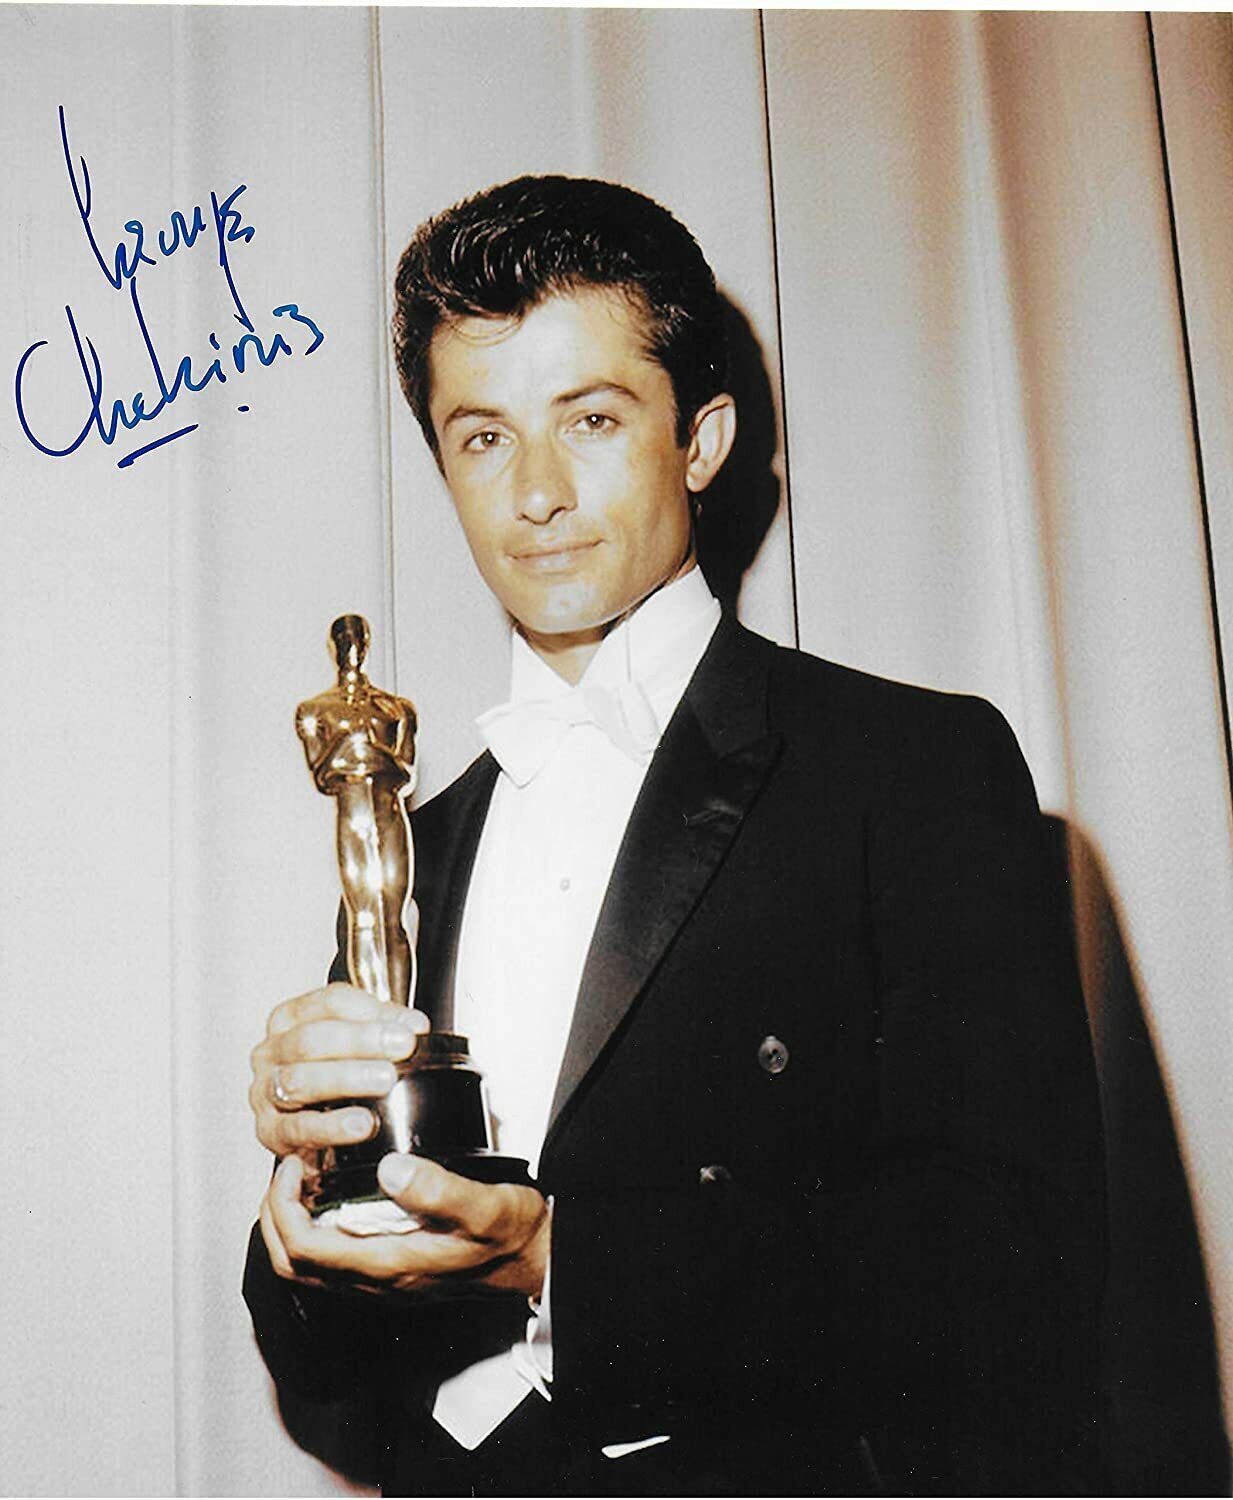 George Chakiris Original In Person Autographed 8X10 Photo Poster painting #3 - West Side Story